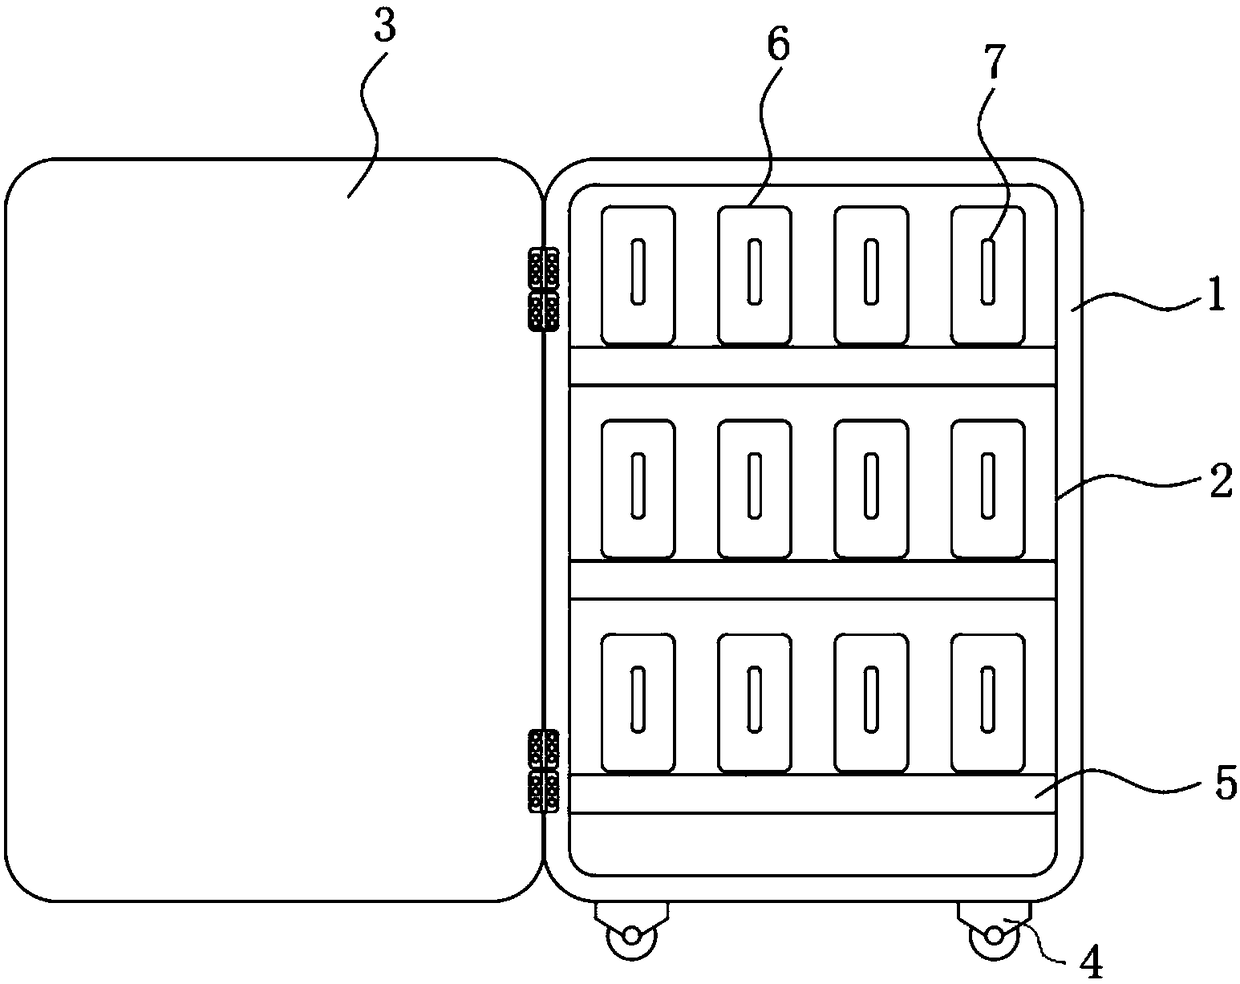 Drawout low-voltage power distribution cabinet